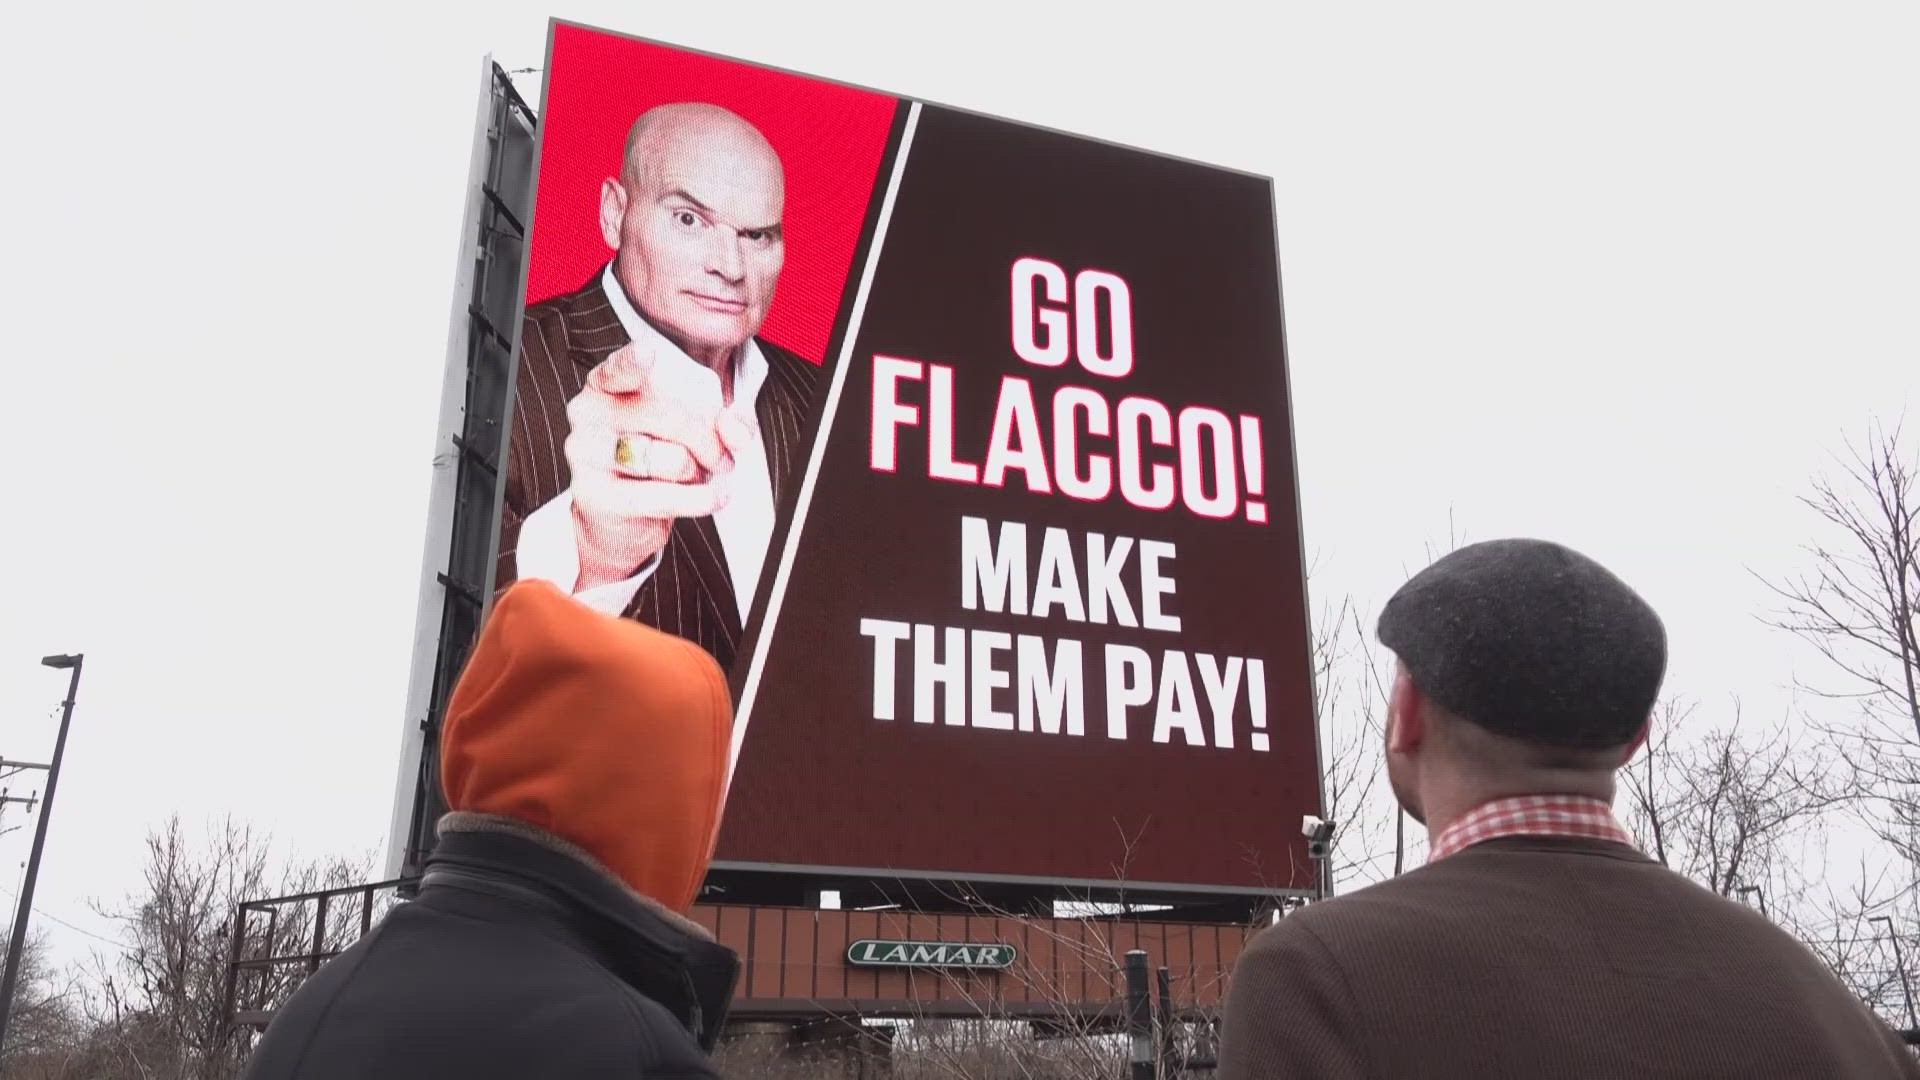 Flacco Fever is in full swing right now, and trending online this week is a fake "Flacco Makes Them Pay" billboard. Mike checks in with Tim Misny.